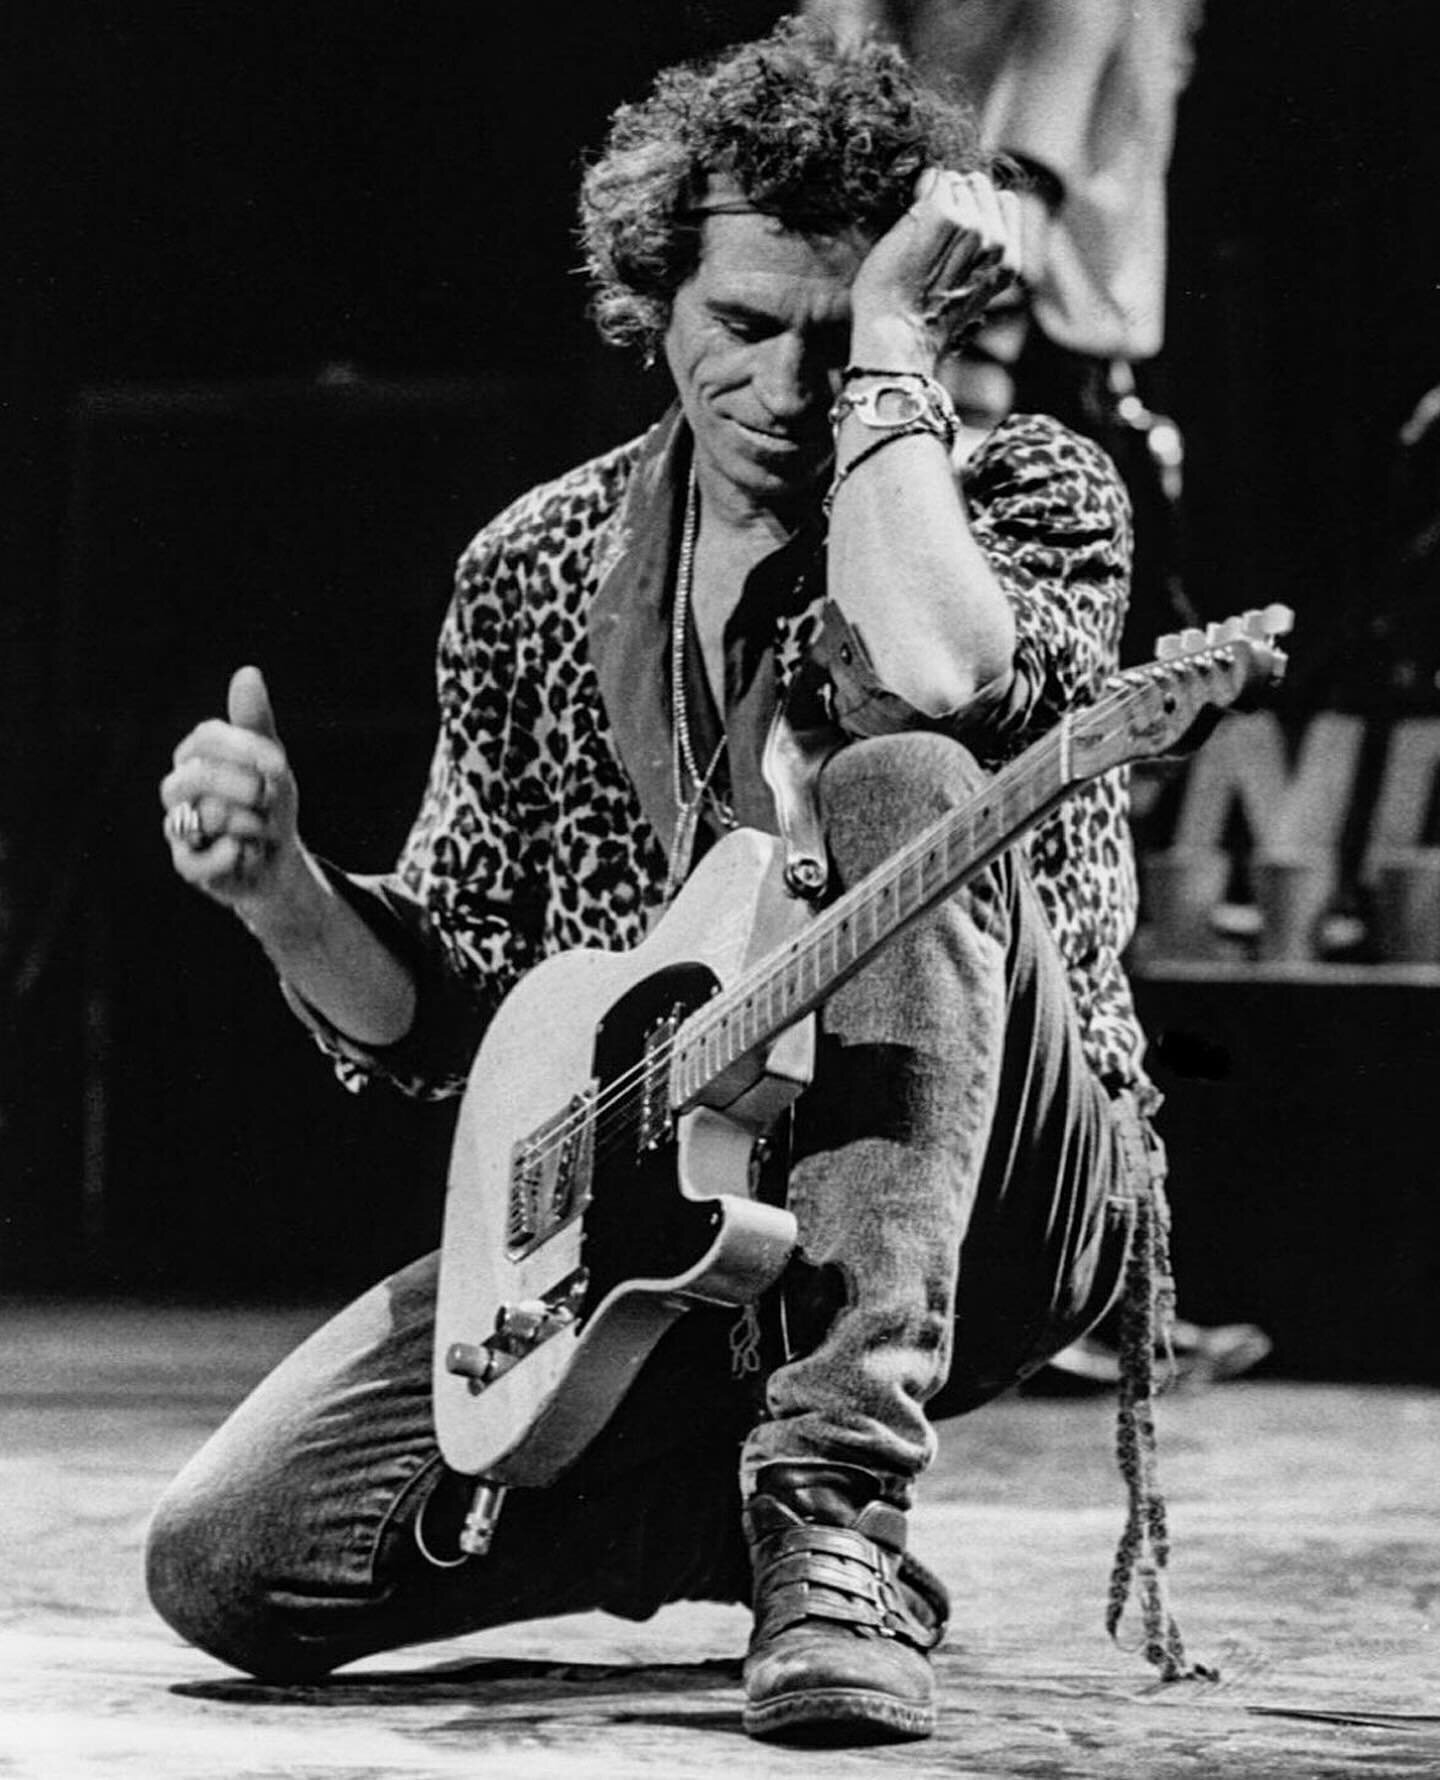 Happy 80th Birthday to the human riff @officialkeef - it&rsquo;s a beautiful thing to know he is still out there, on stage strumming a tele in open G like only he can. May the good lord shine a light on you! 🎸🎸🎸

#KeithRichards #80 #TheRollingSton